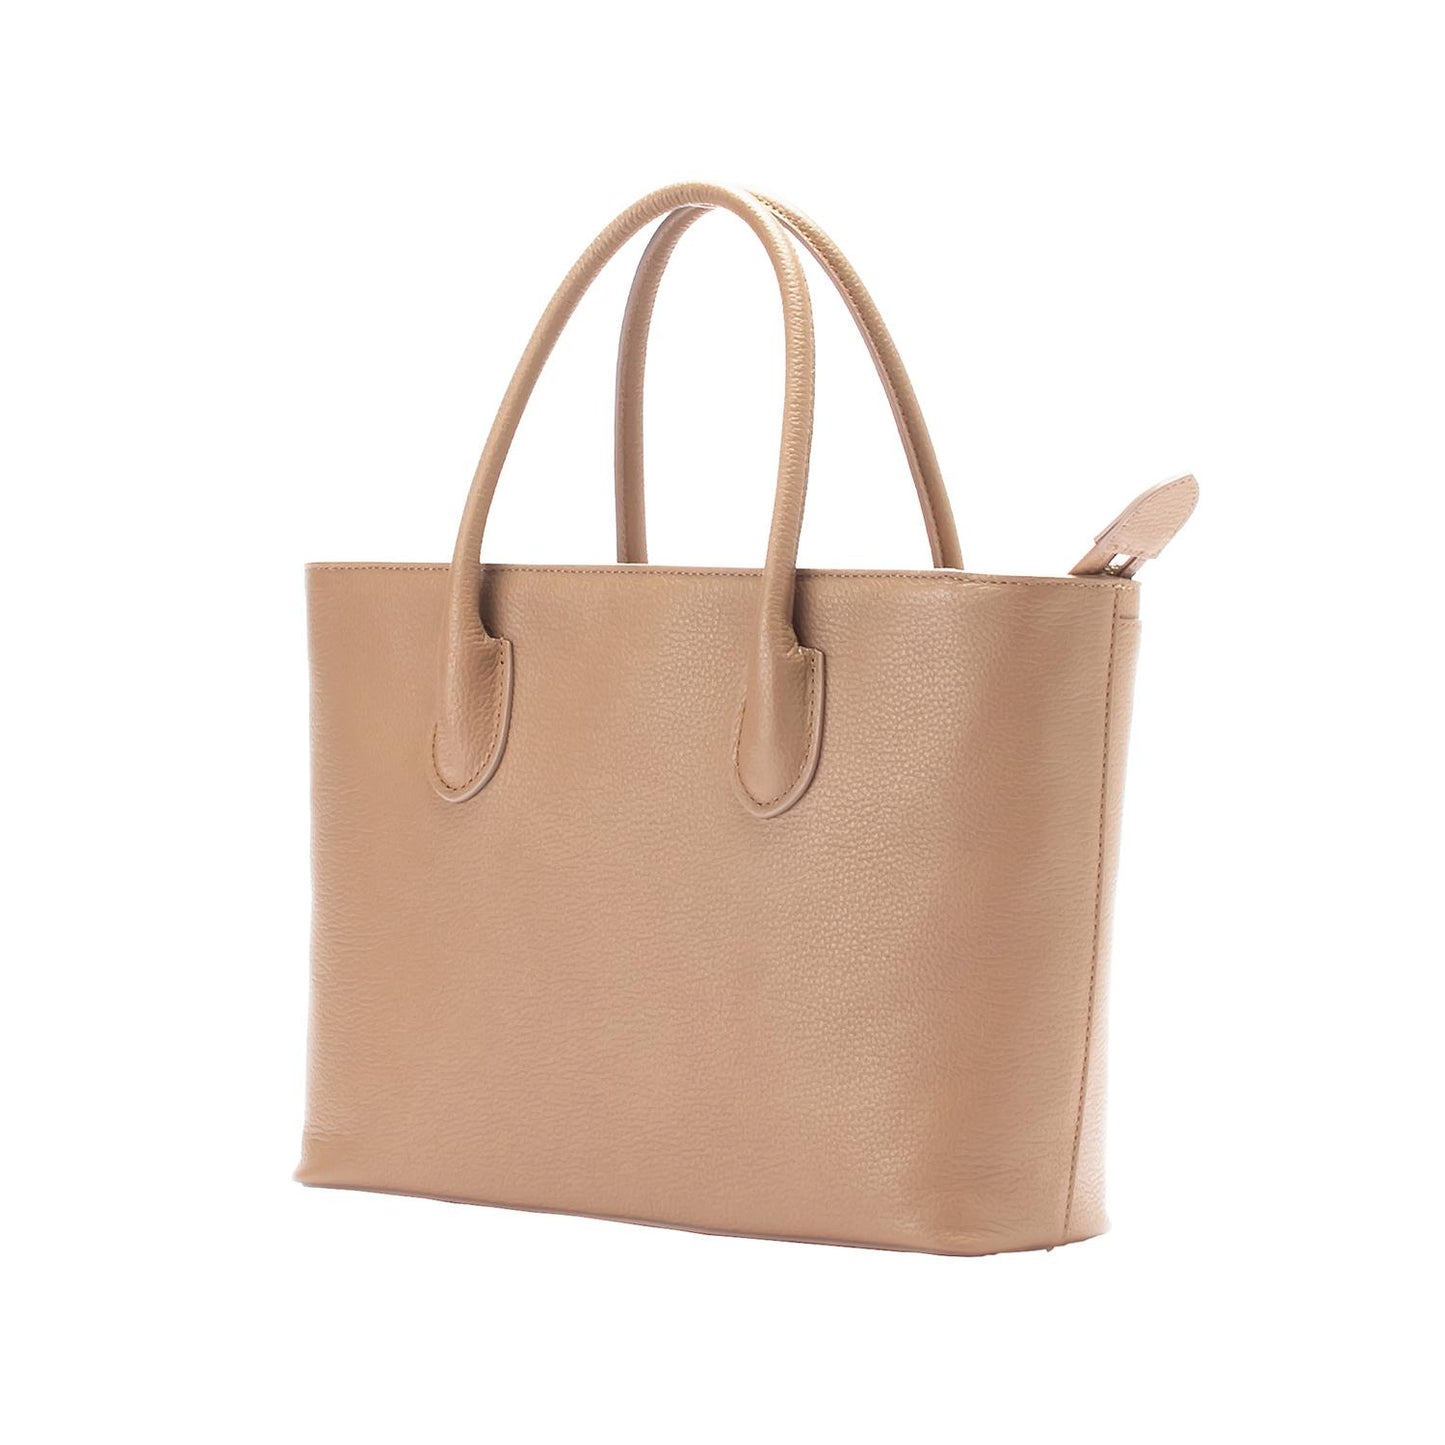 TOTTE Shulink Tote